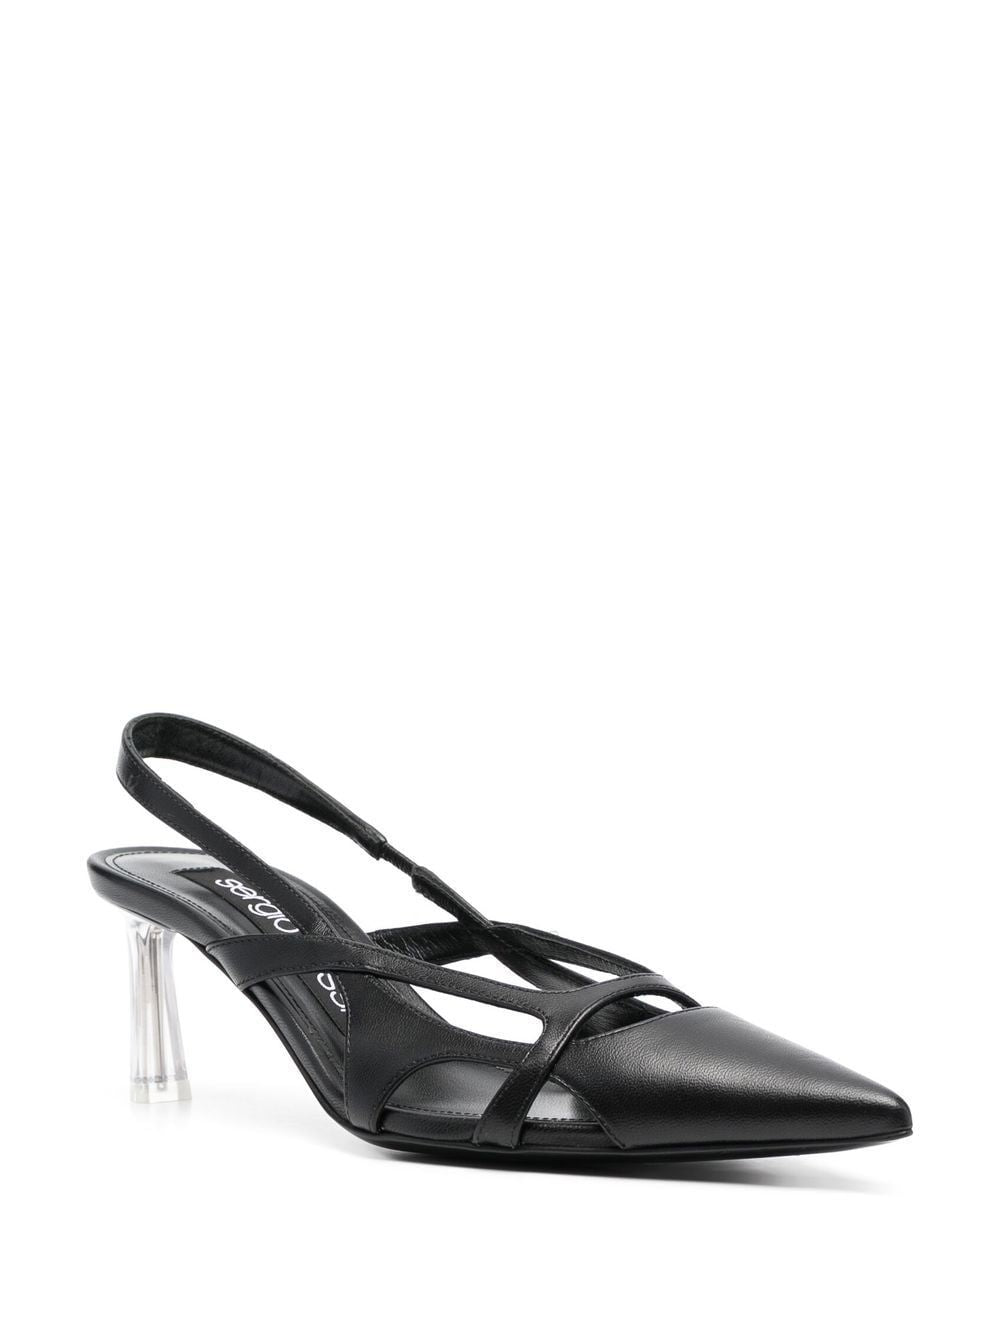 SERGIO ROSSI Black Leather Slingback Pumps for Women